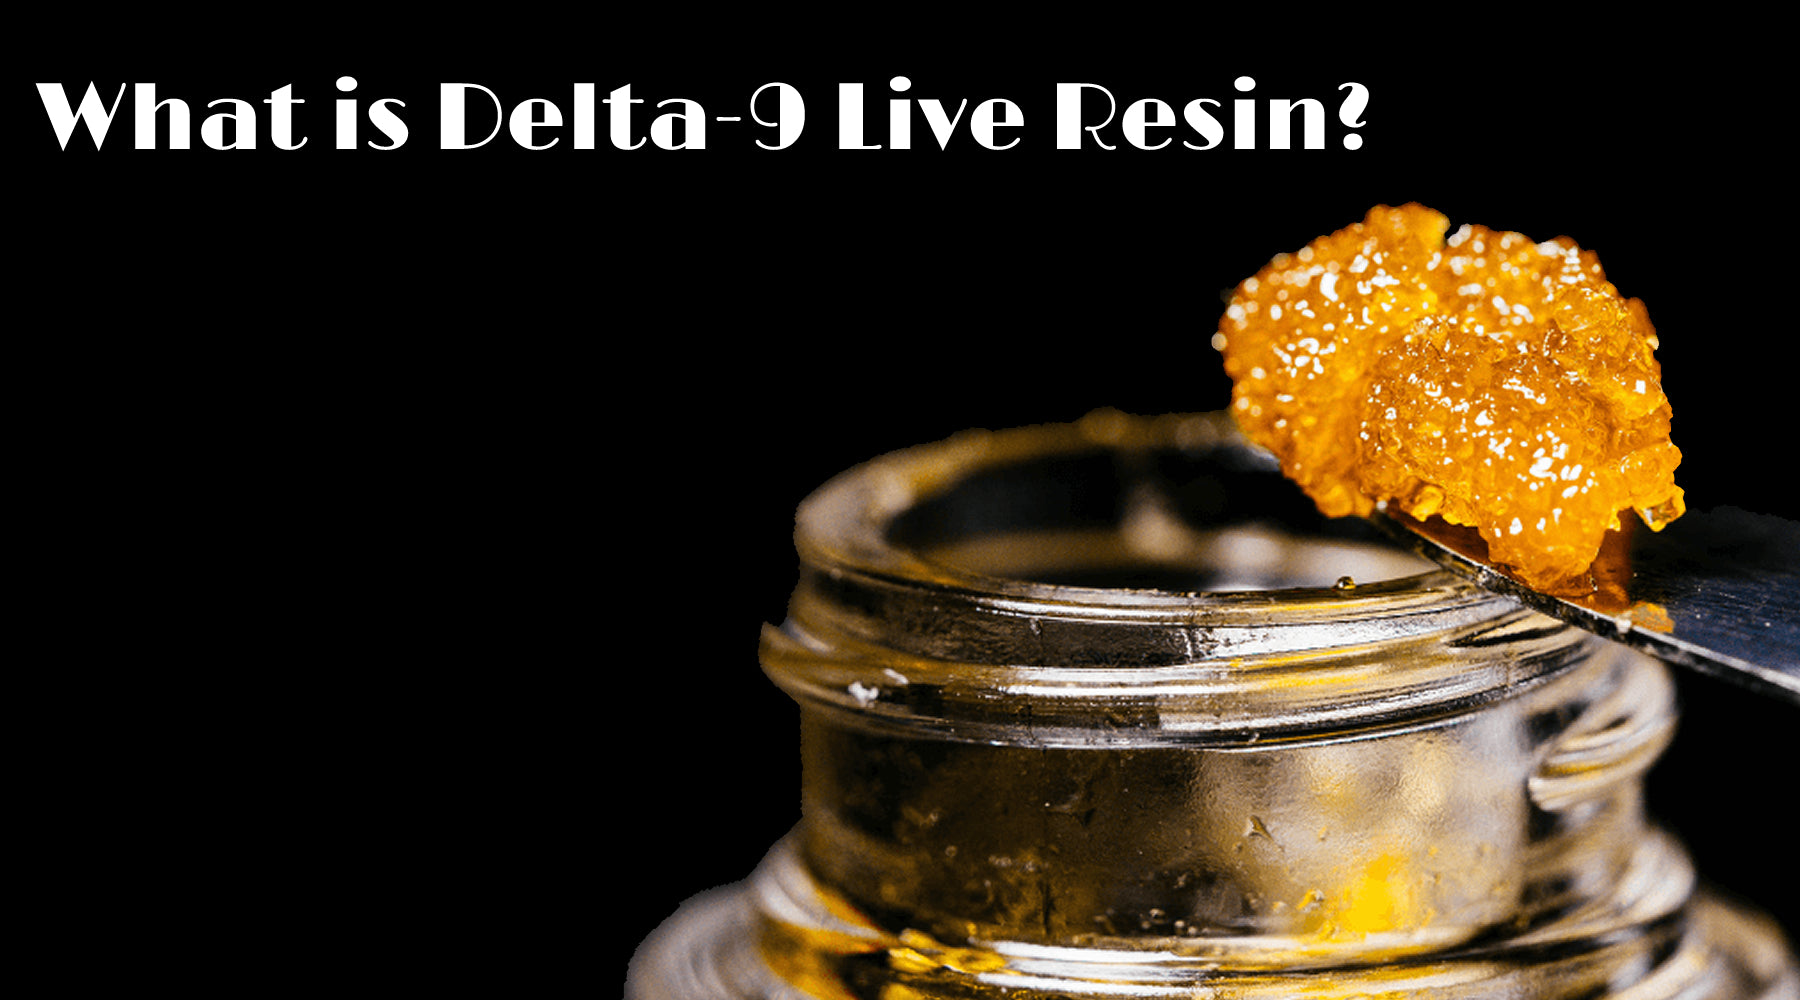 What is Delta-9 Live Resin?